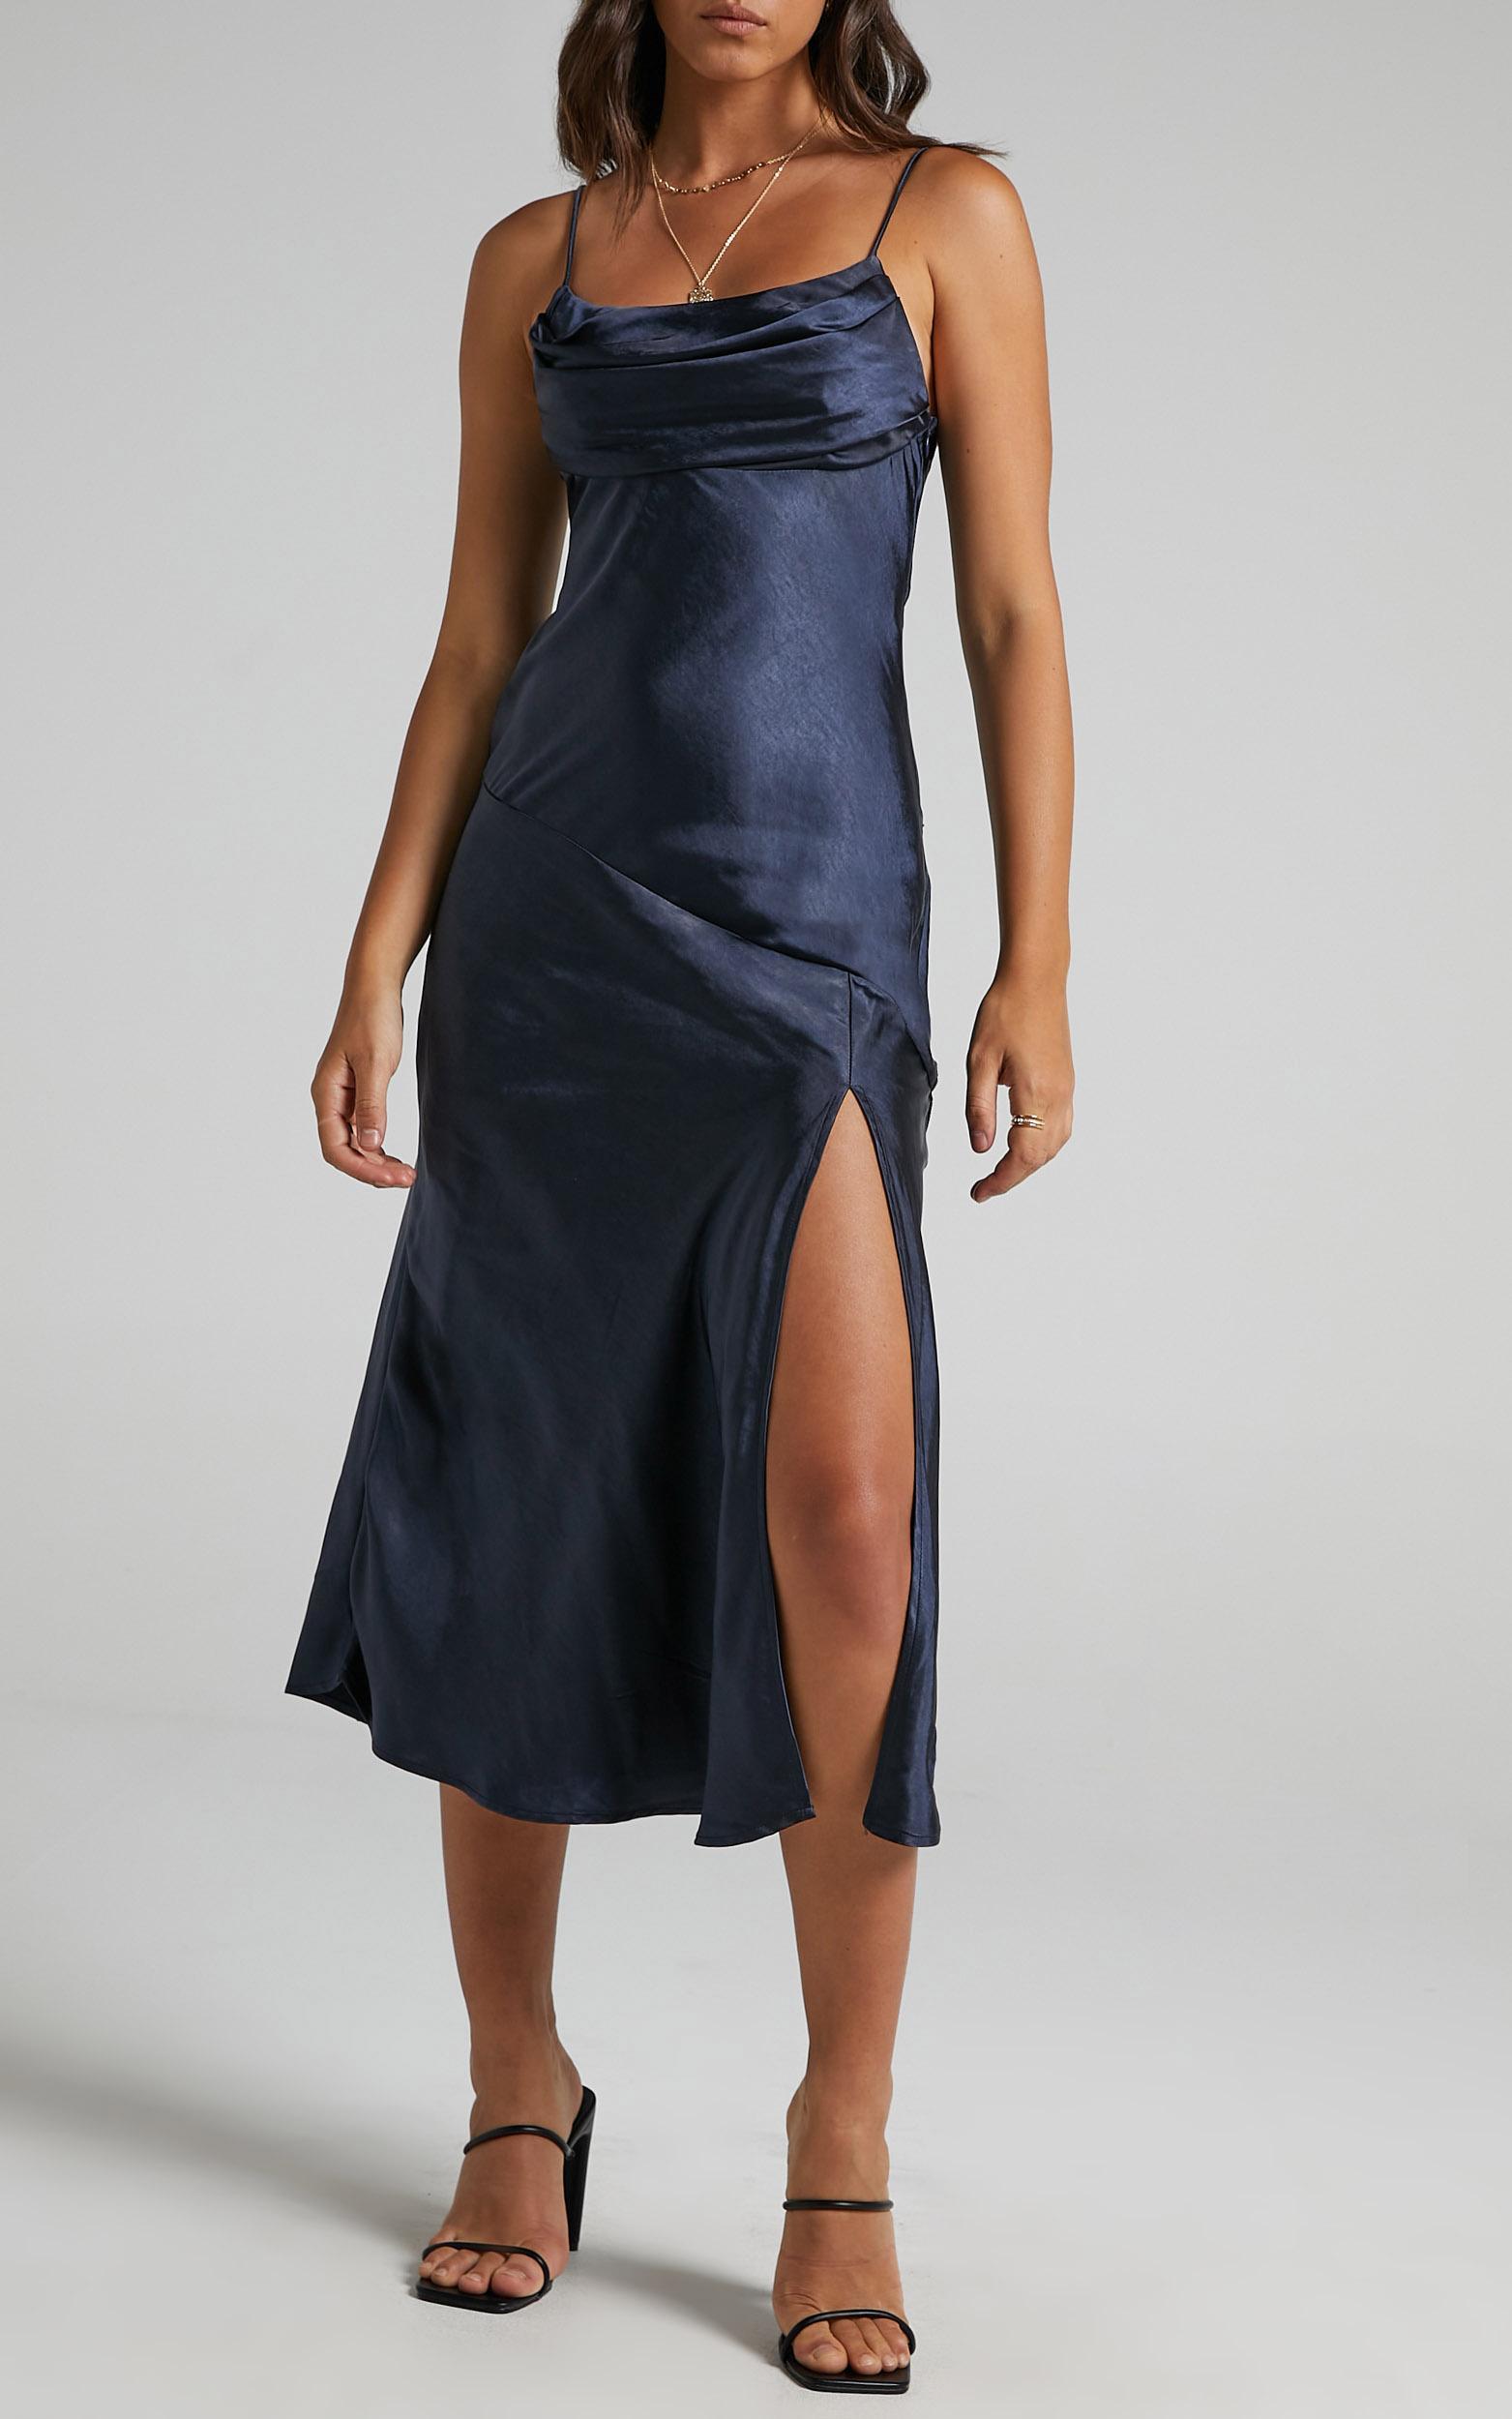 Monica Dress in Navy Satin - 06, NVY1, hi-res image number null